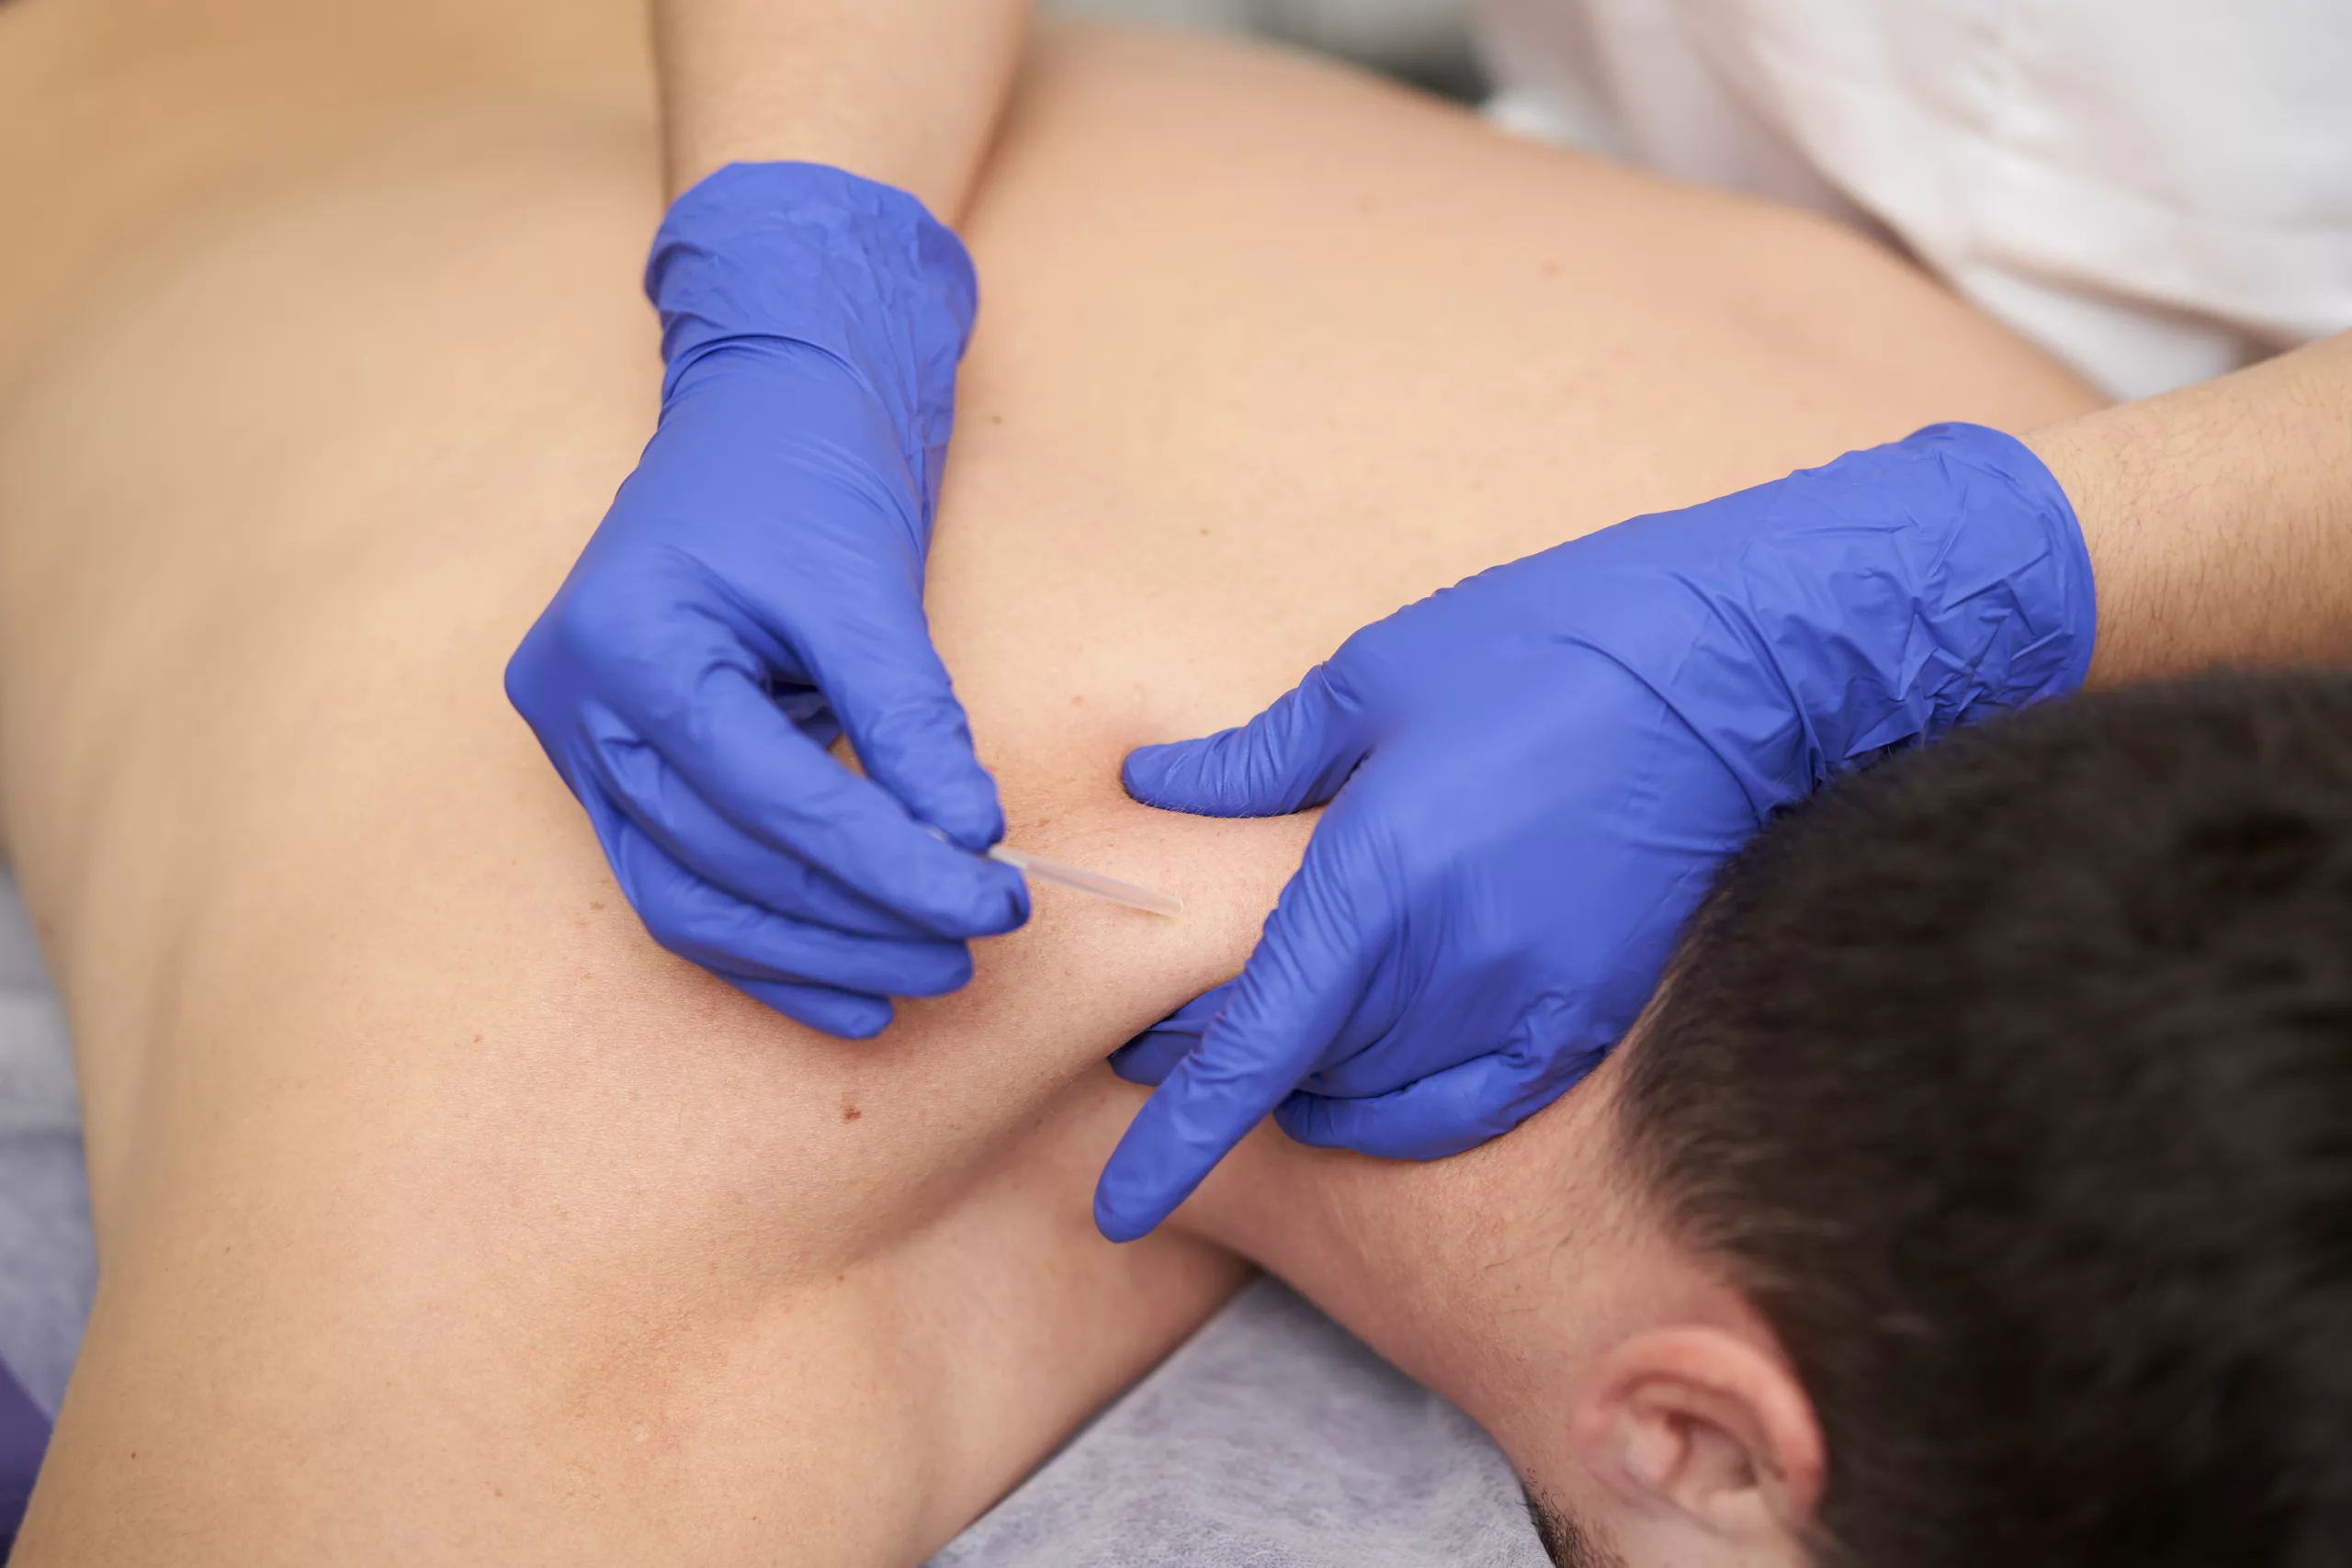 Dry Needling in muscle to relieve pain